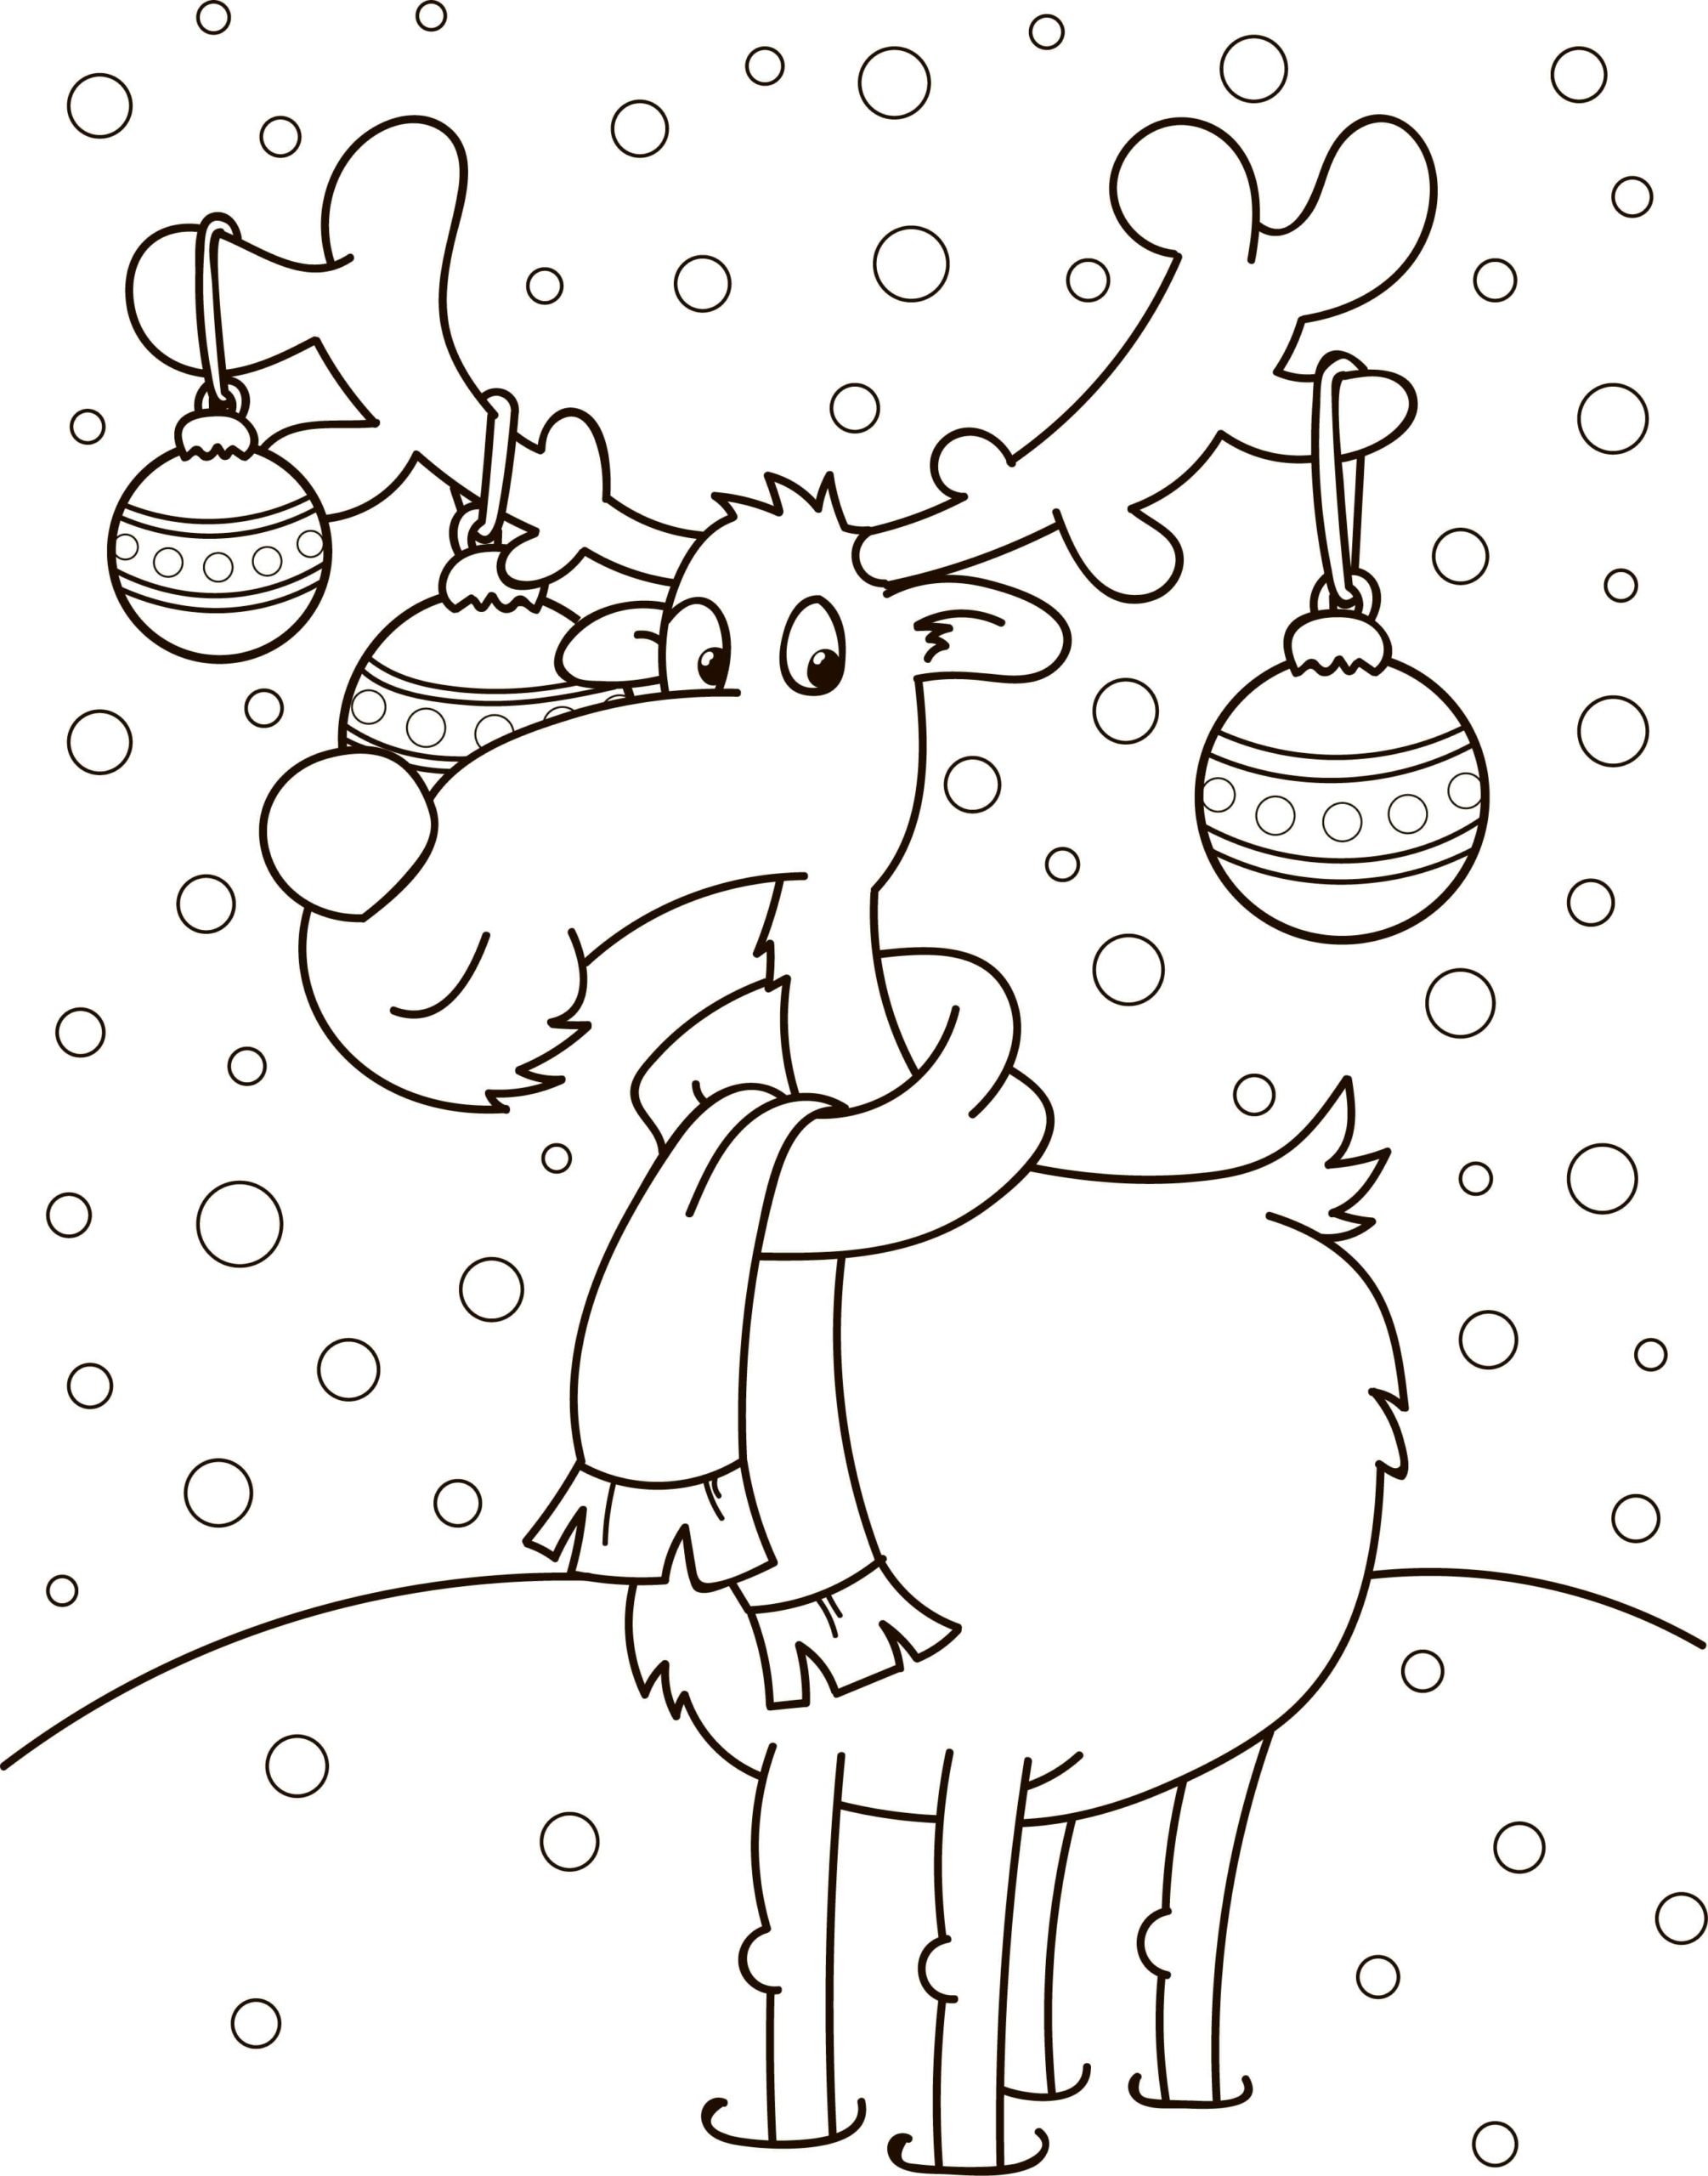 Deer With Garlands On The Horns Coloring Page